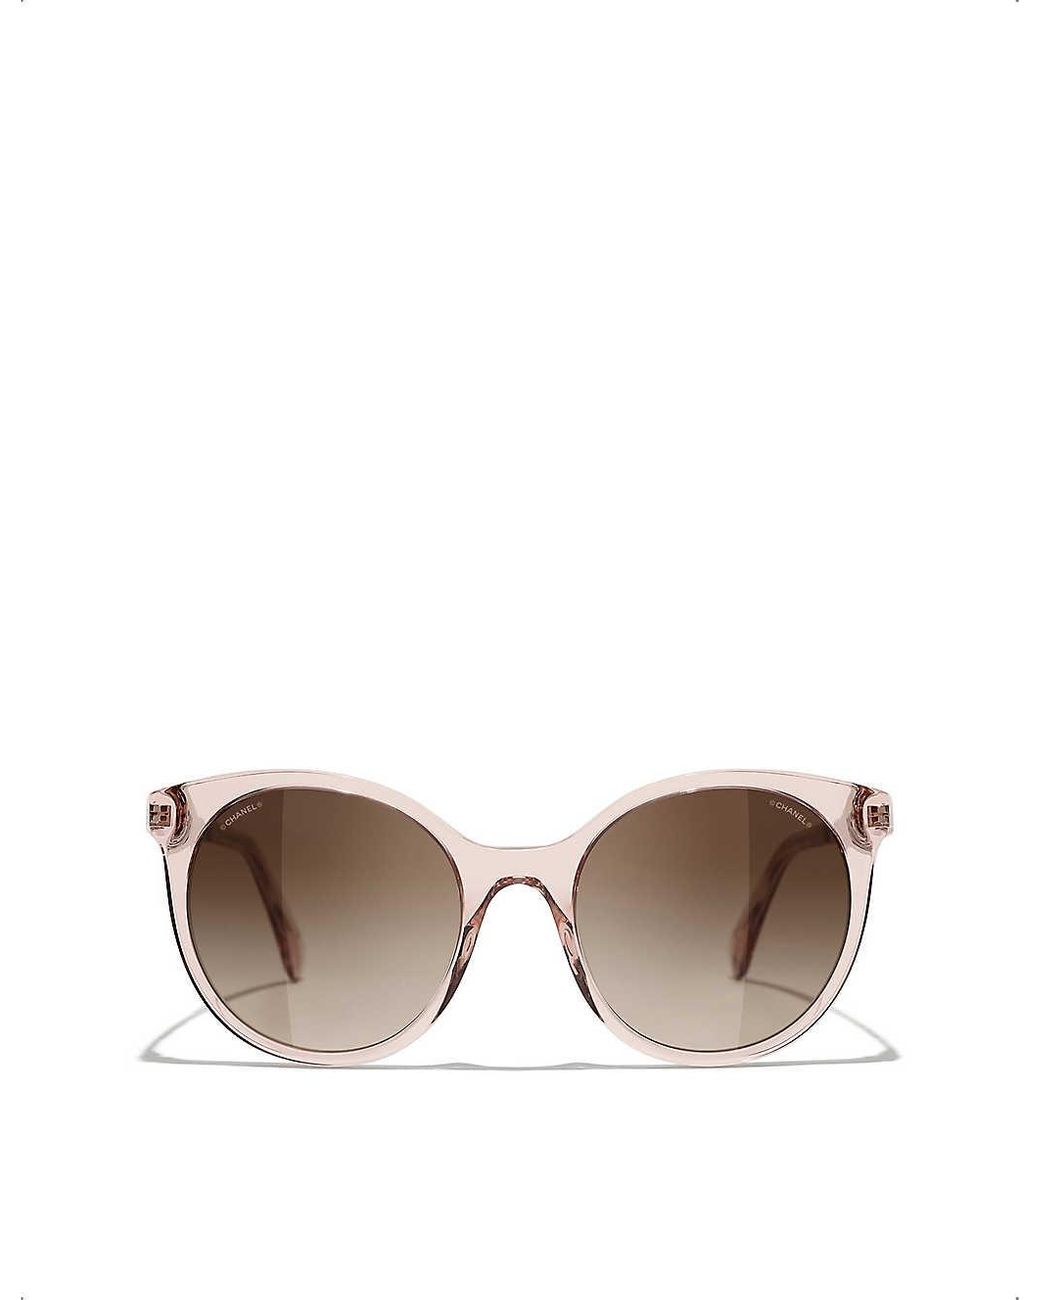 Chanel Pantos Sunglasses in Pink